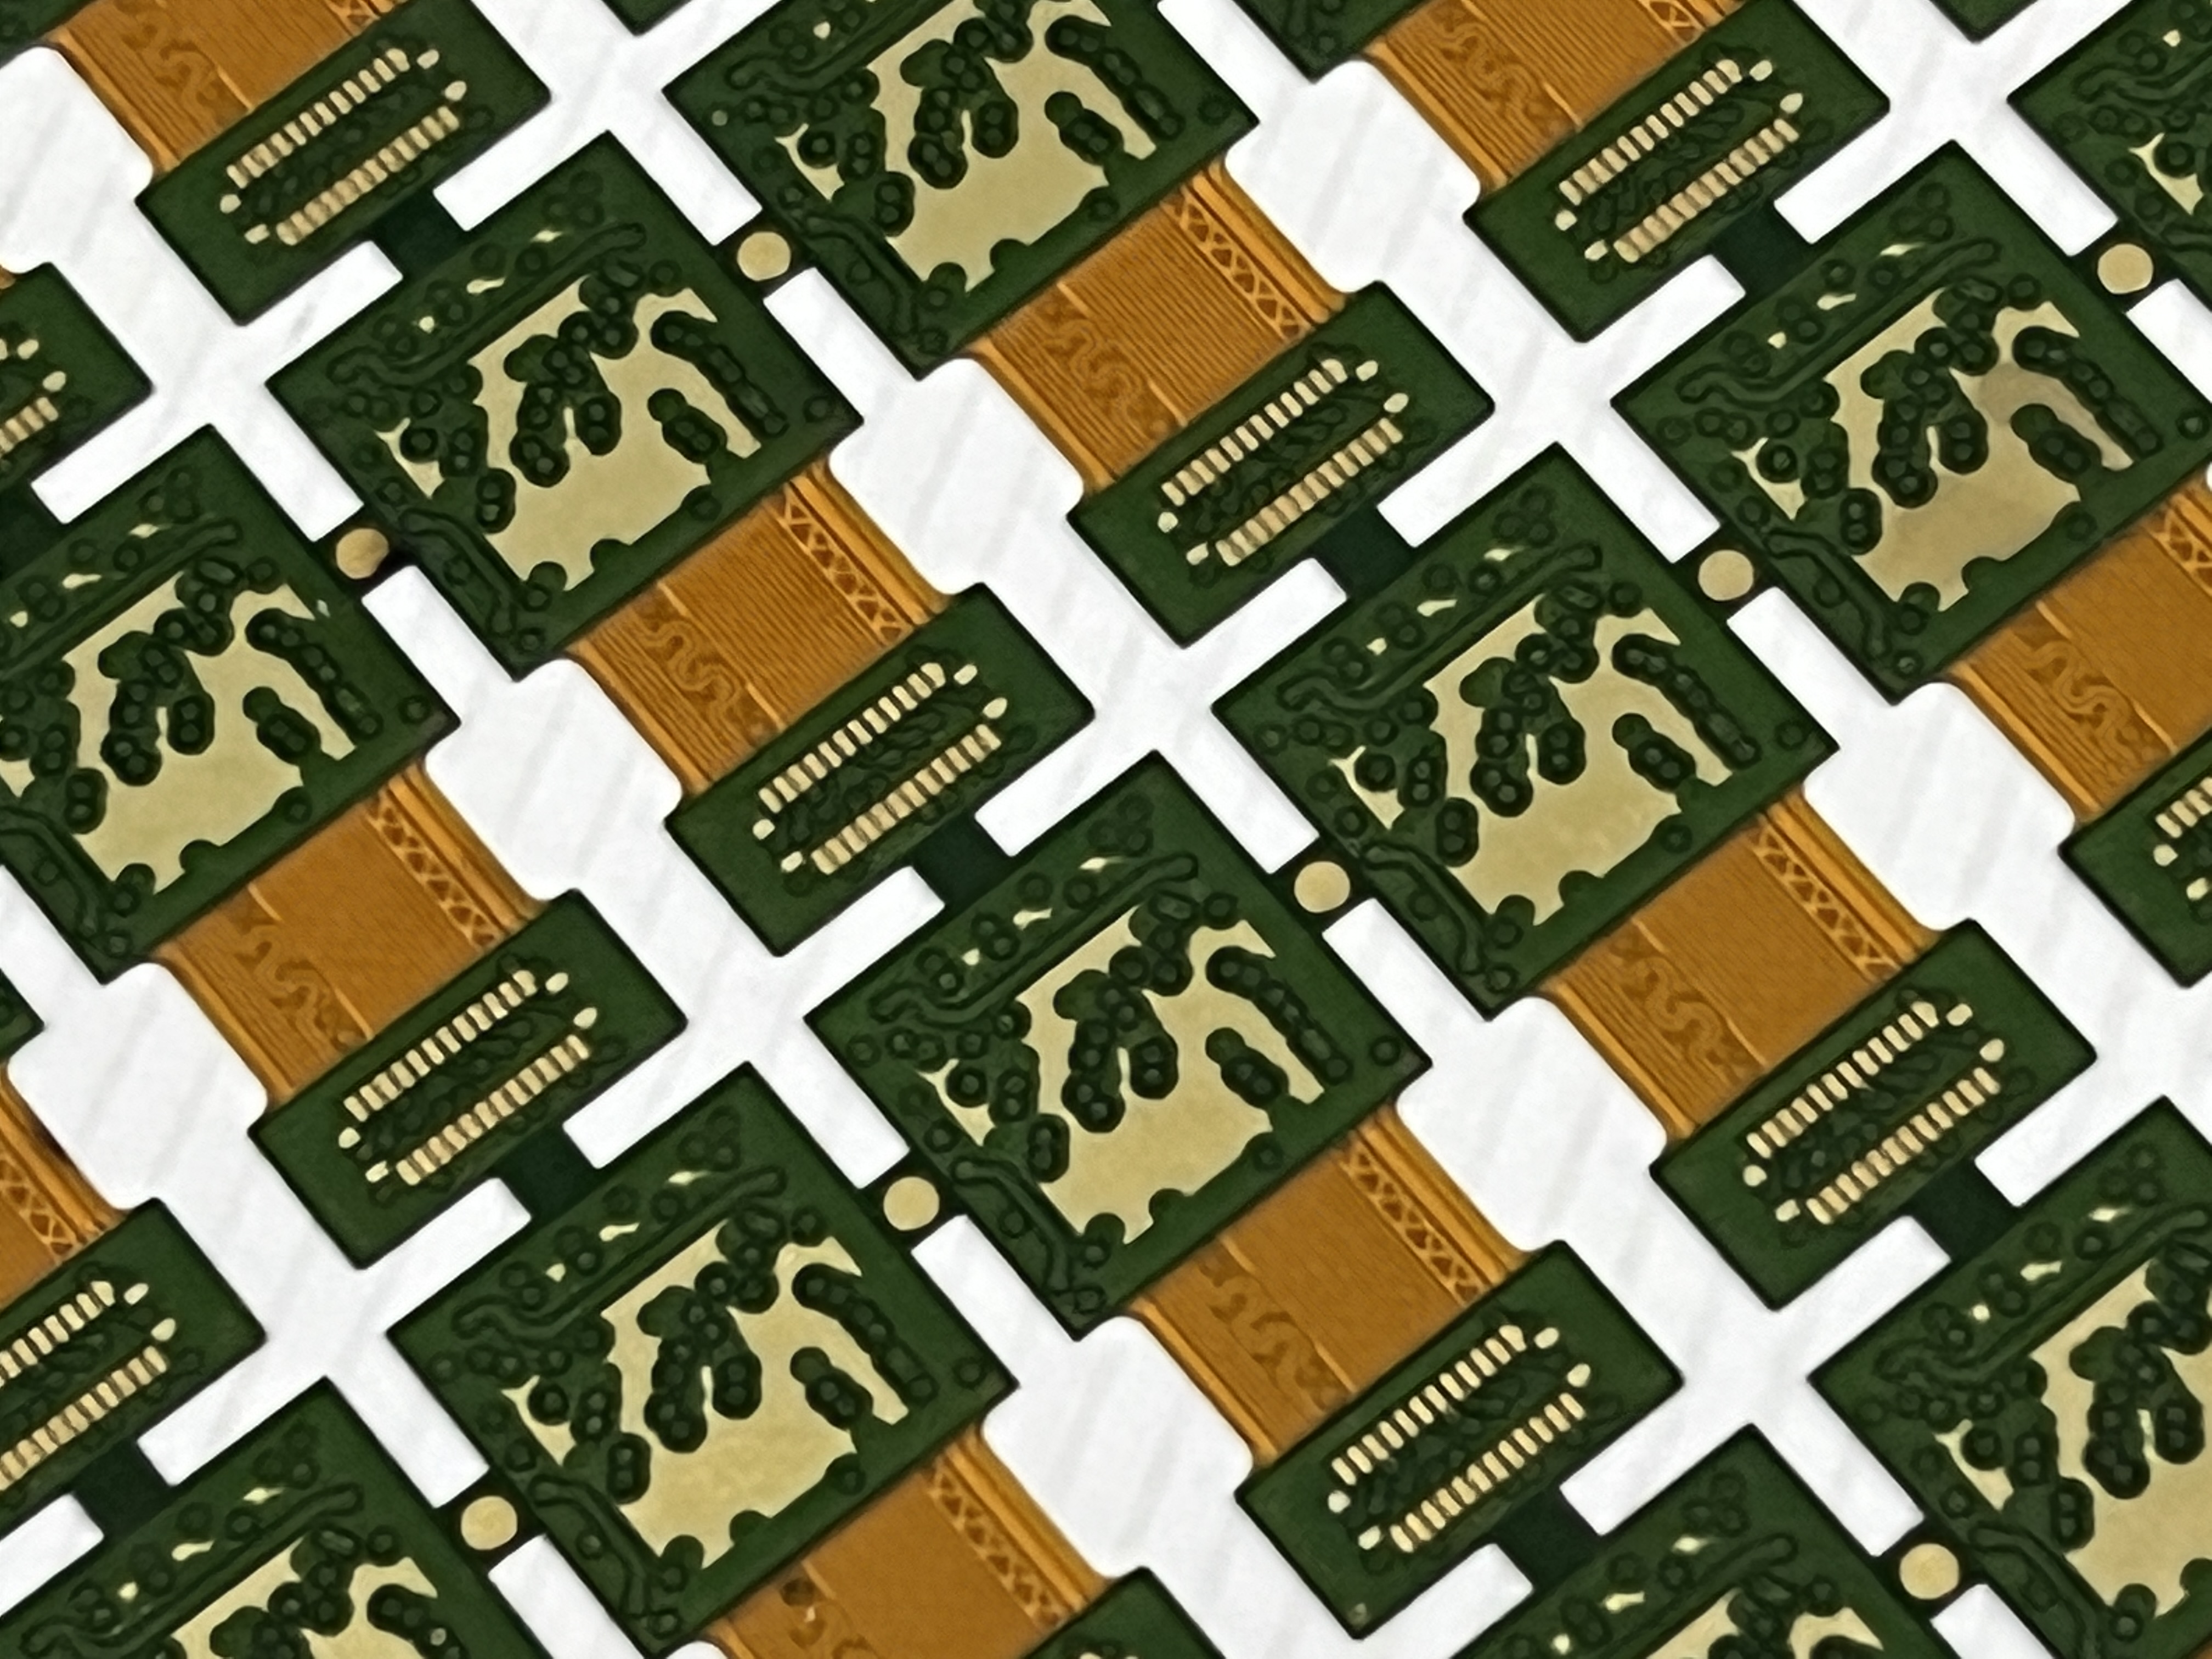 Why is copper used in printed circuit boards?